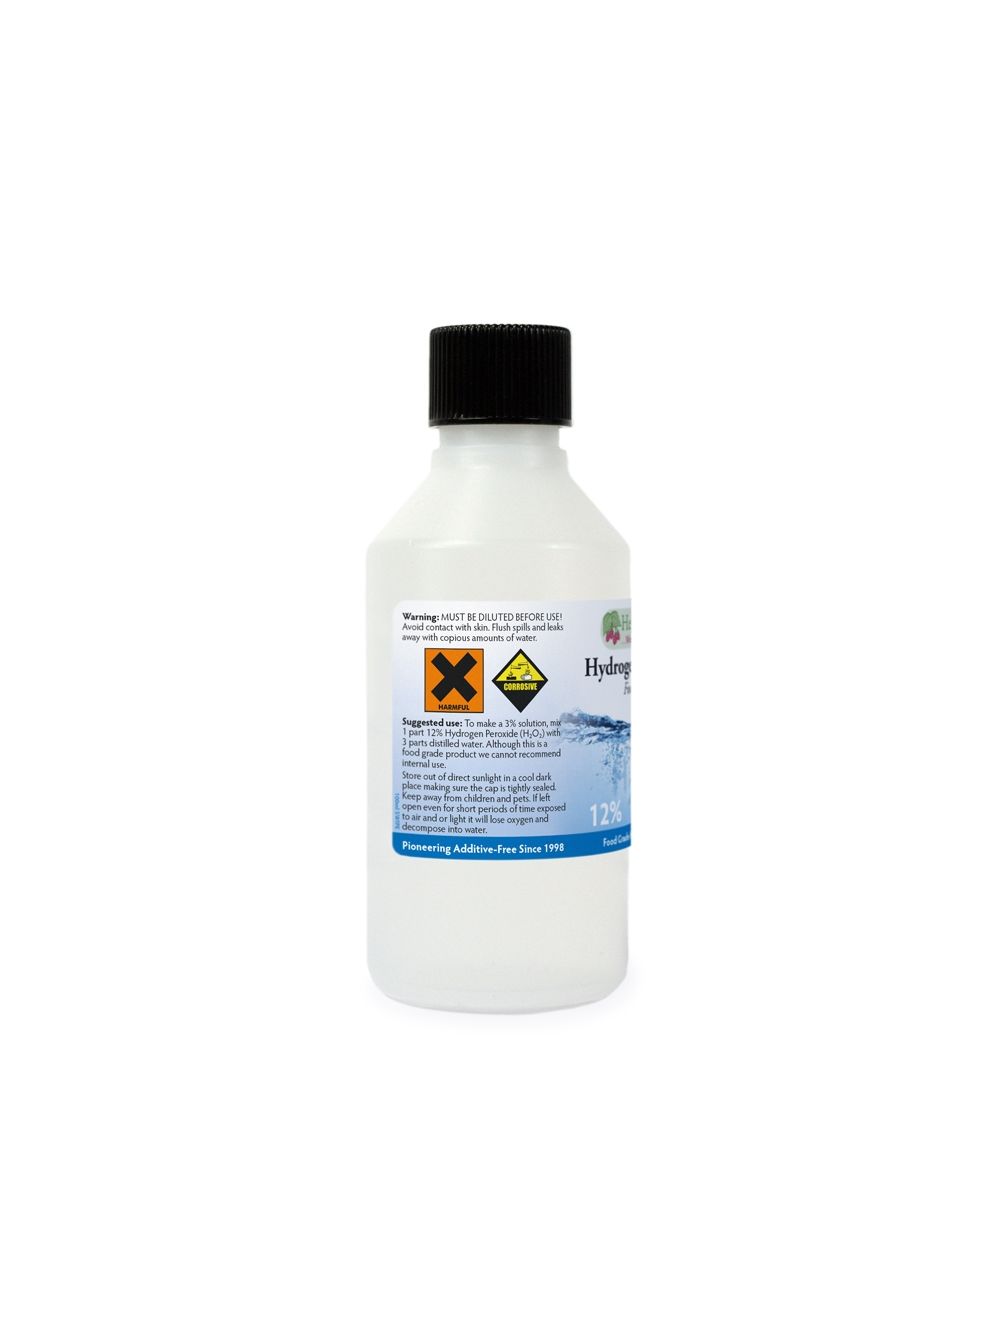 12% Hydrogen Peroxide Food Grade, H2O2, stabilizer-free, superoxide,  disinfectant, teeth whitening | Health Leads UK